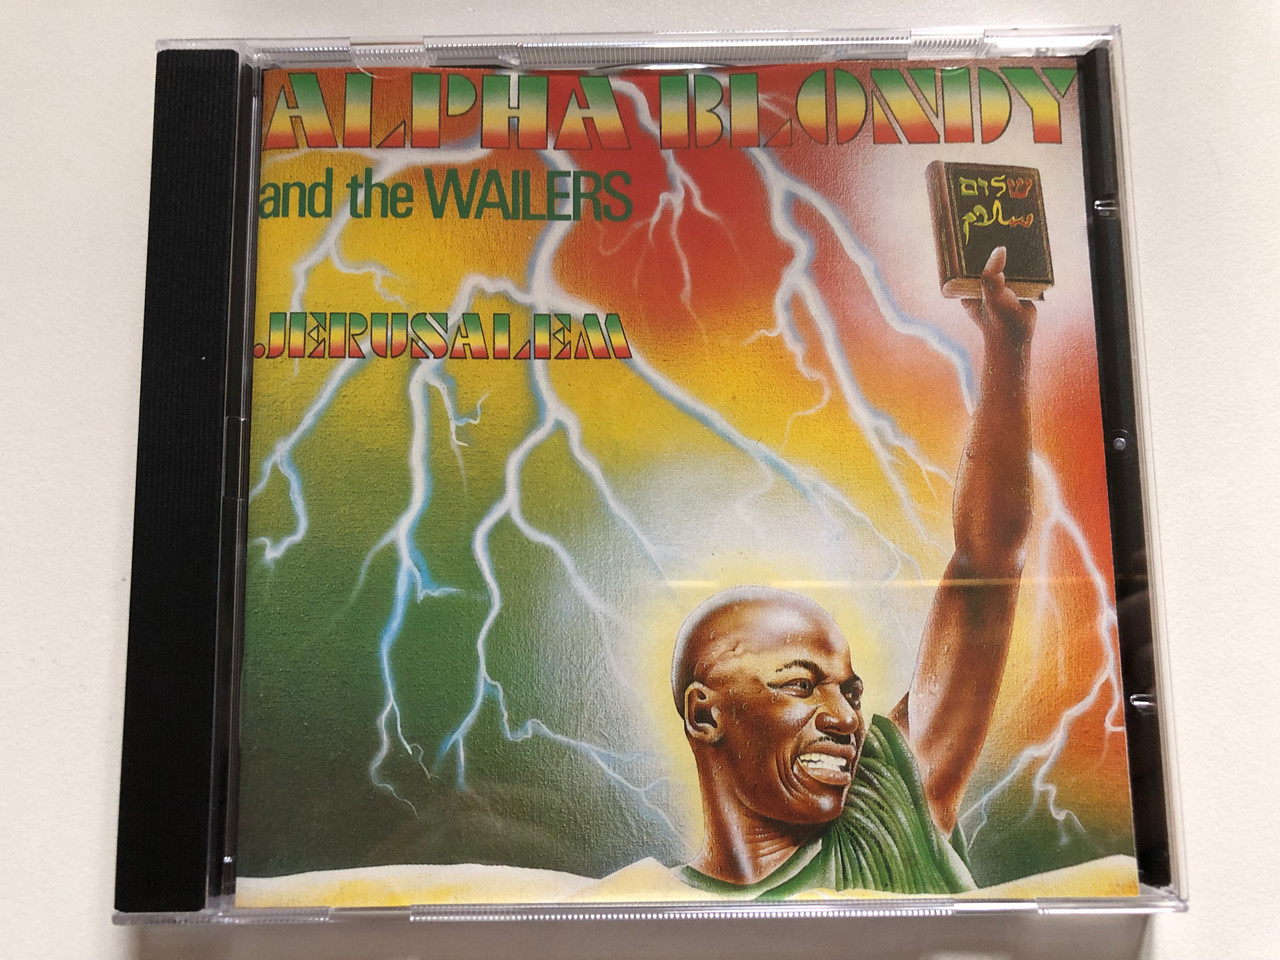 https://cdn10.bigcommerce.com/s-62bdpkt7pb/products/0/images/310472/Alpha_Blondy_And_The_Wailers_Jrusalem_Path_Audio_CD_1986_7464642_1__28488.1699379445.1280.1280.JPG?c=2